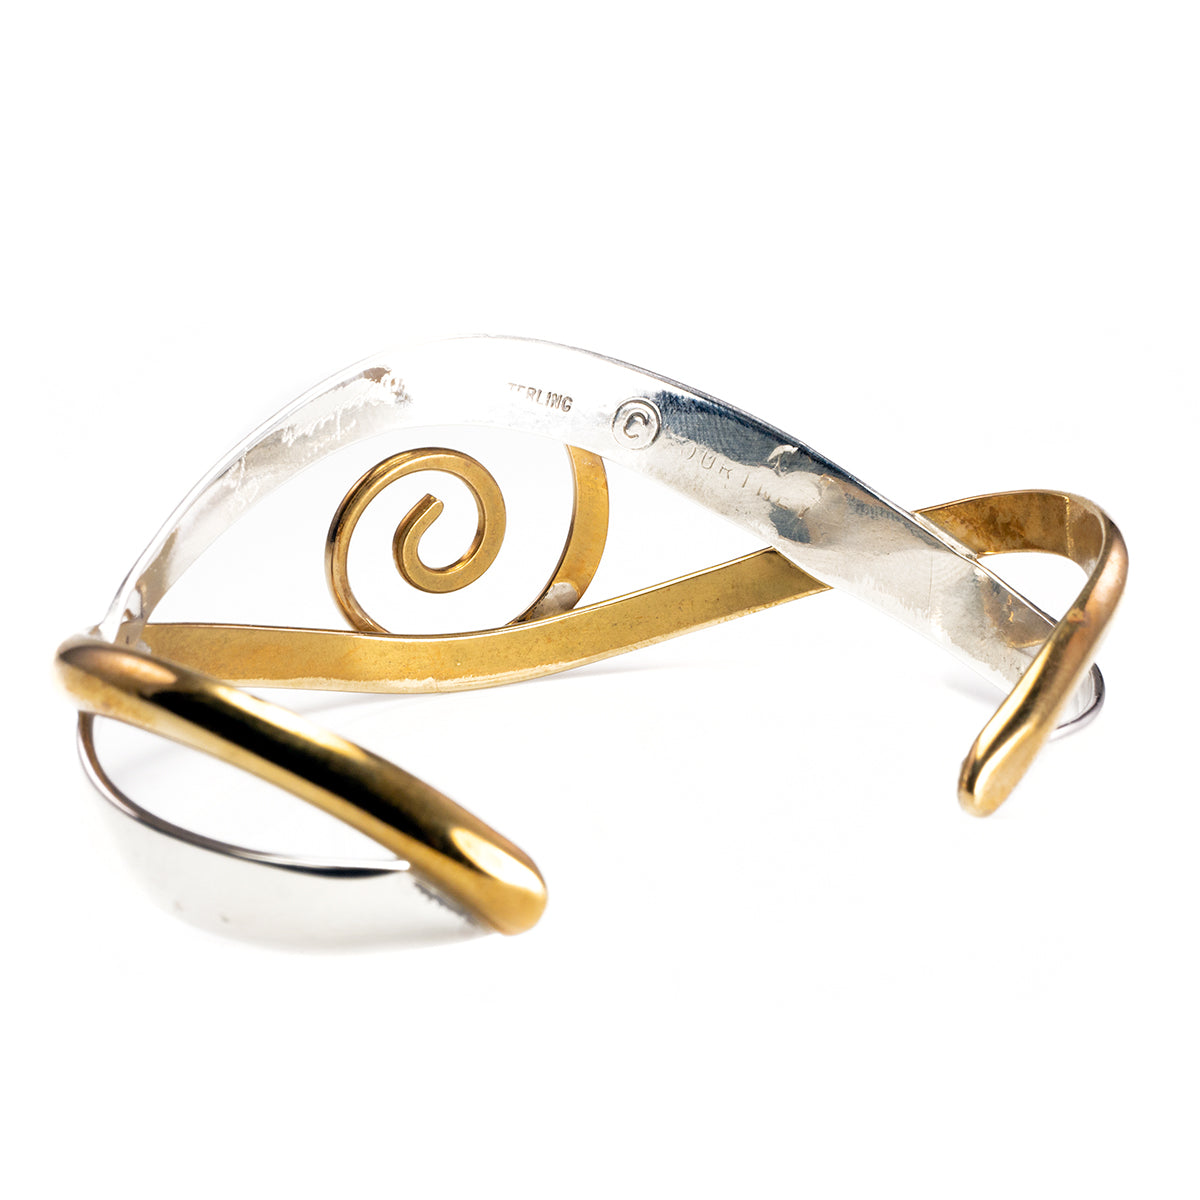 Silver and Brass Bangle